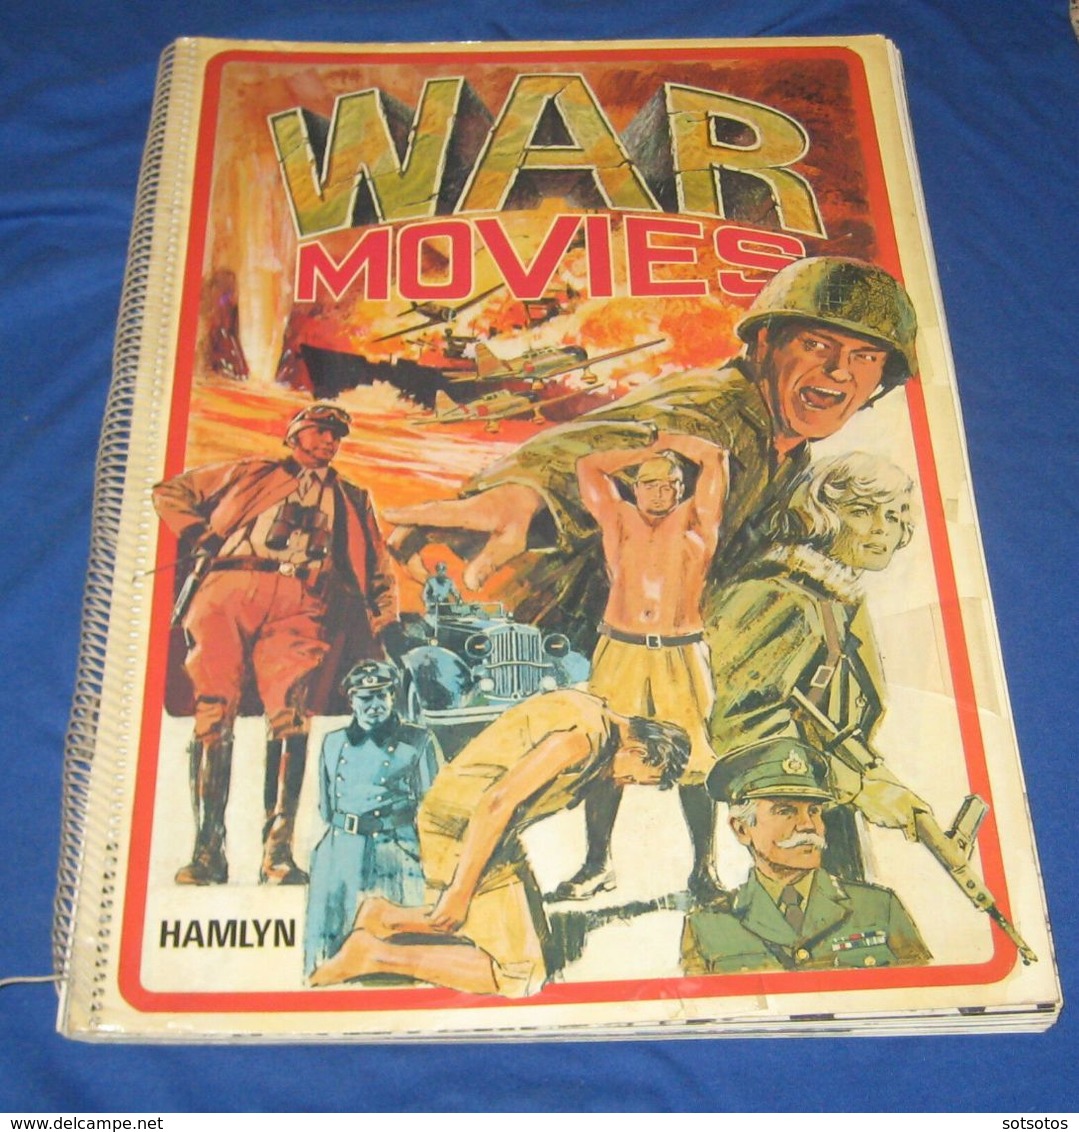 War Movies By Tom Perlmutter Ed. Hamlyn, 1974 - First Edition - Ring Bound Soft Cover Book With Stiff Pictorial Card, Fi - Art